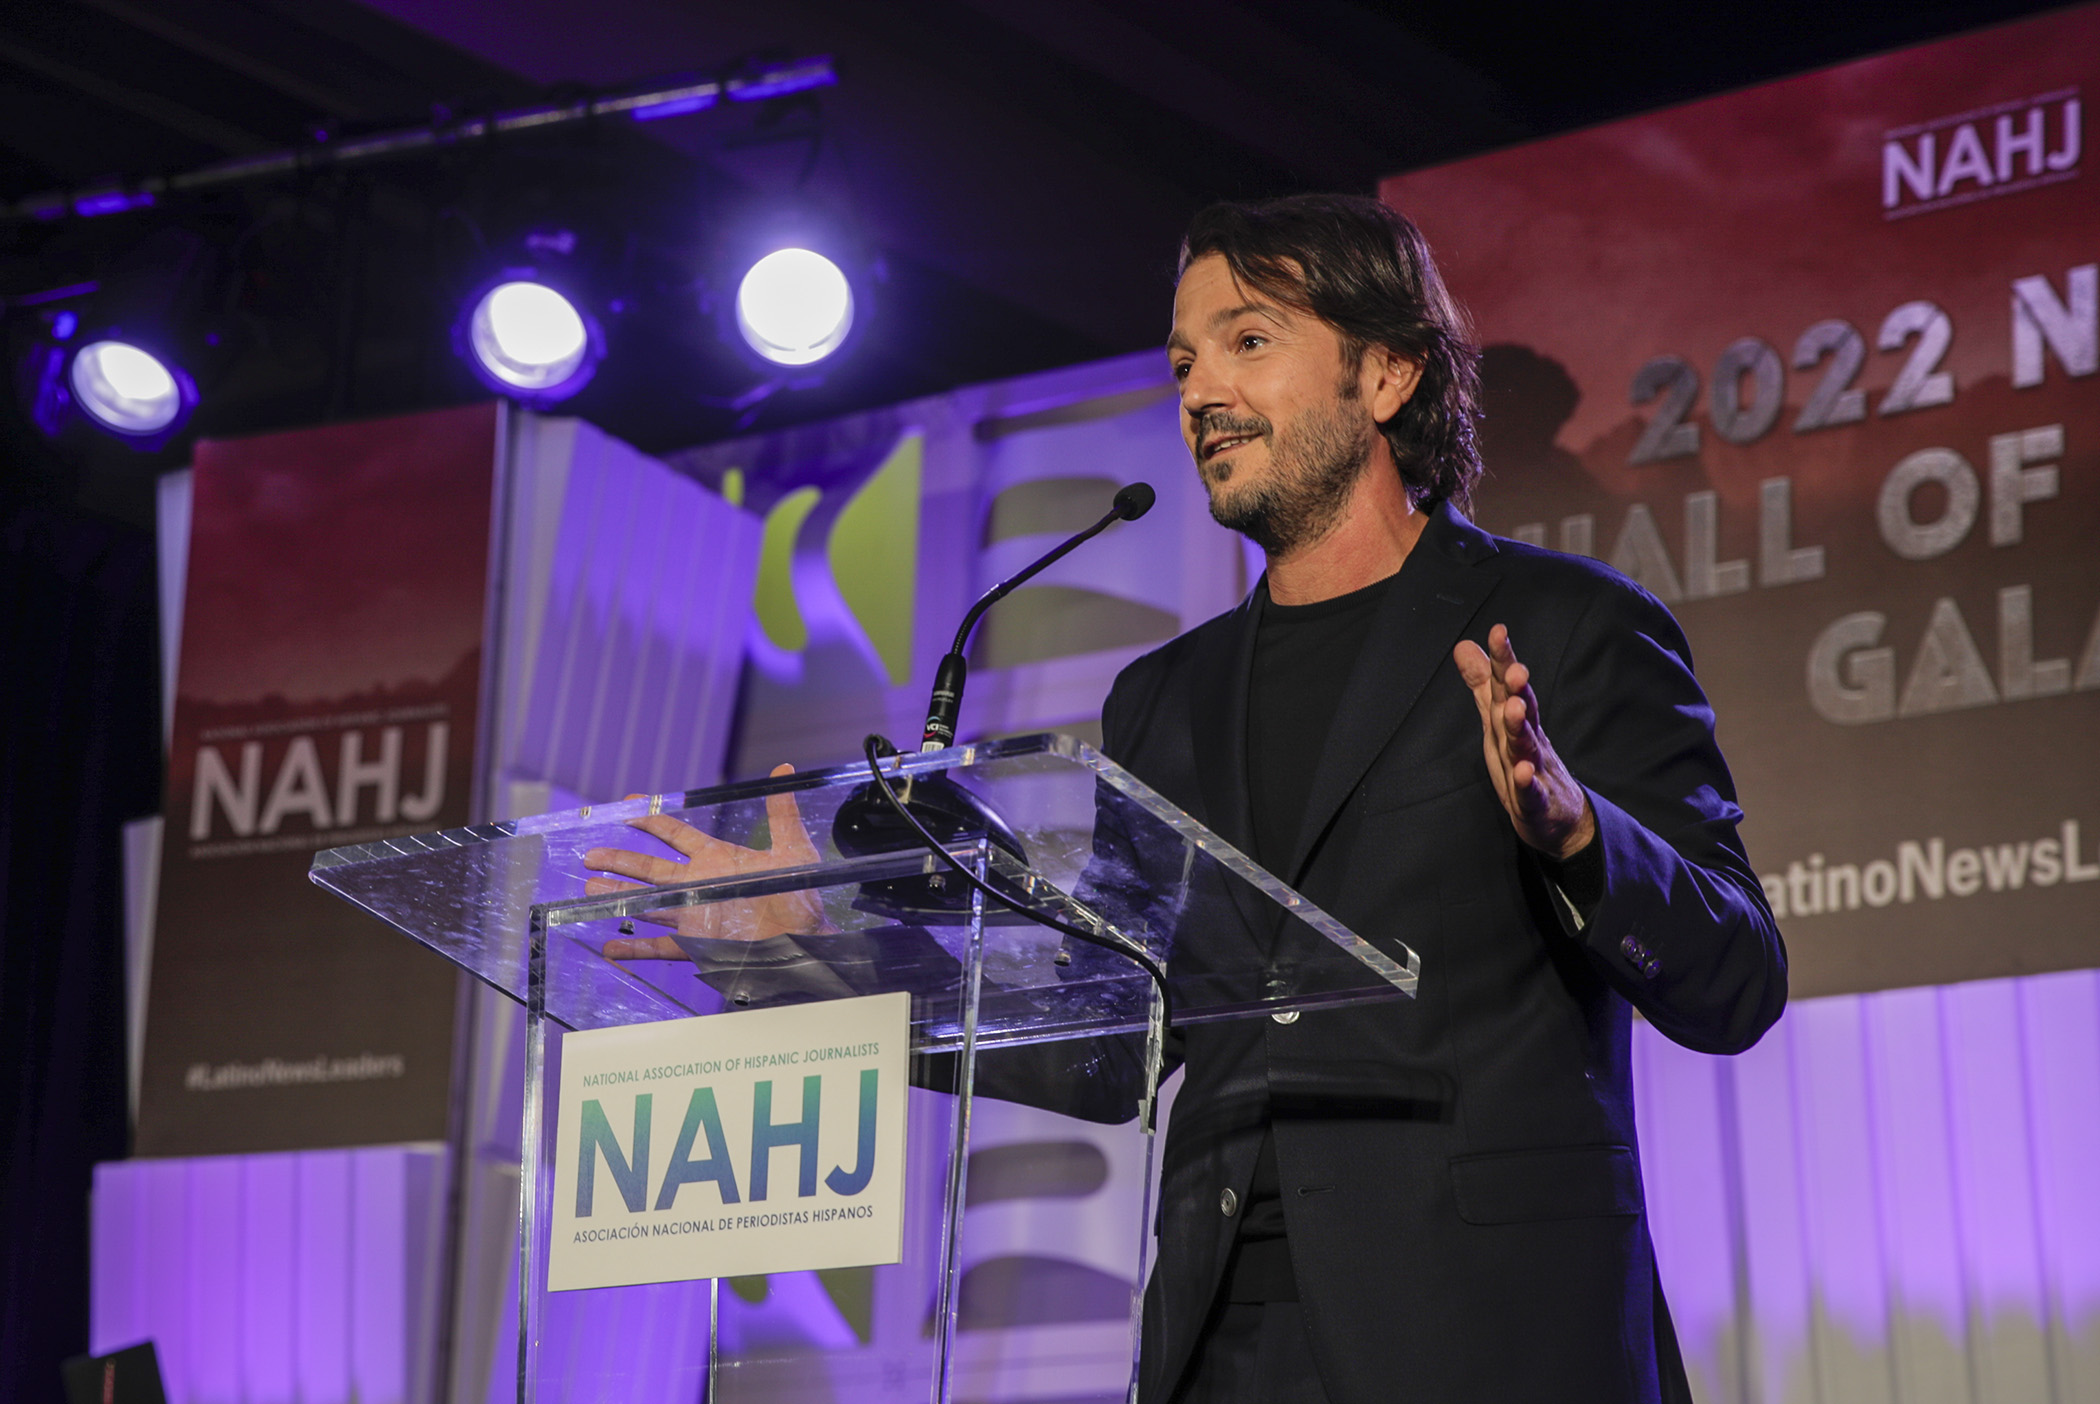 Actor Diego Luna shared his thoughts on representation in media at the National Association of Hispanic Journalists Hall of Fame Gala in Las Vegas, Nev., on Saturday, August 6, 2022.